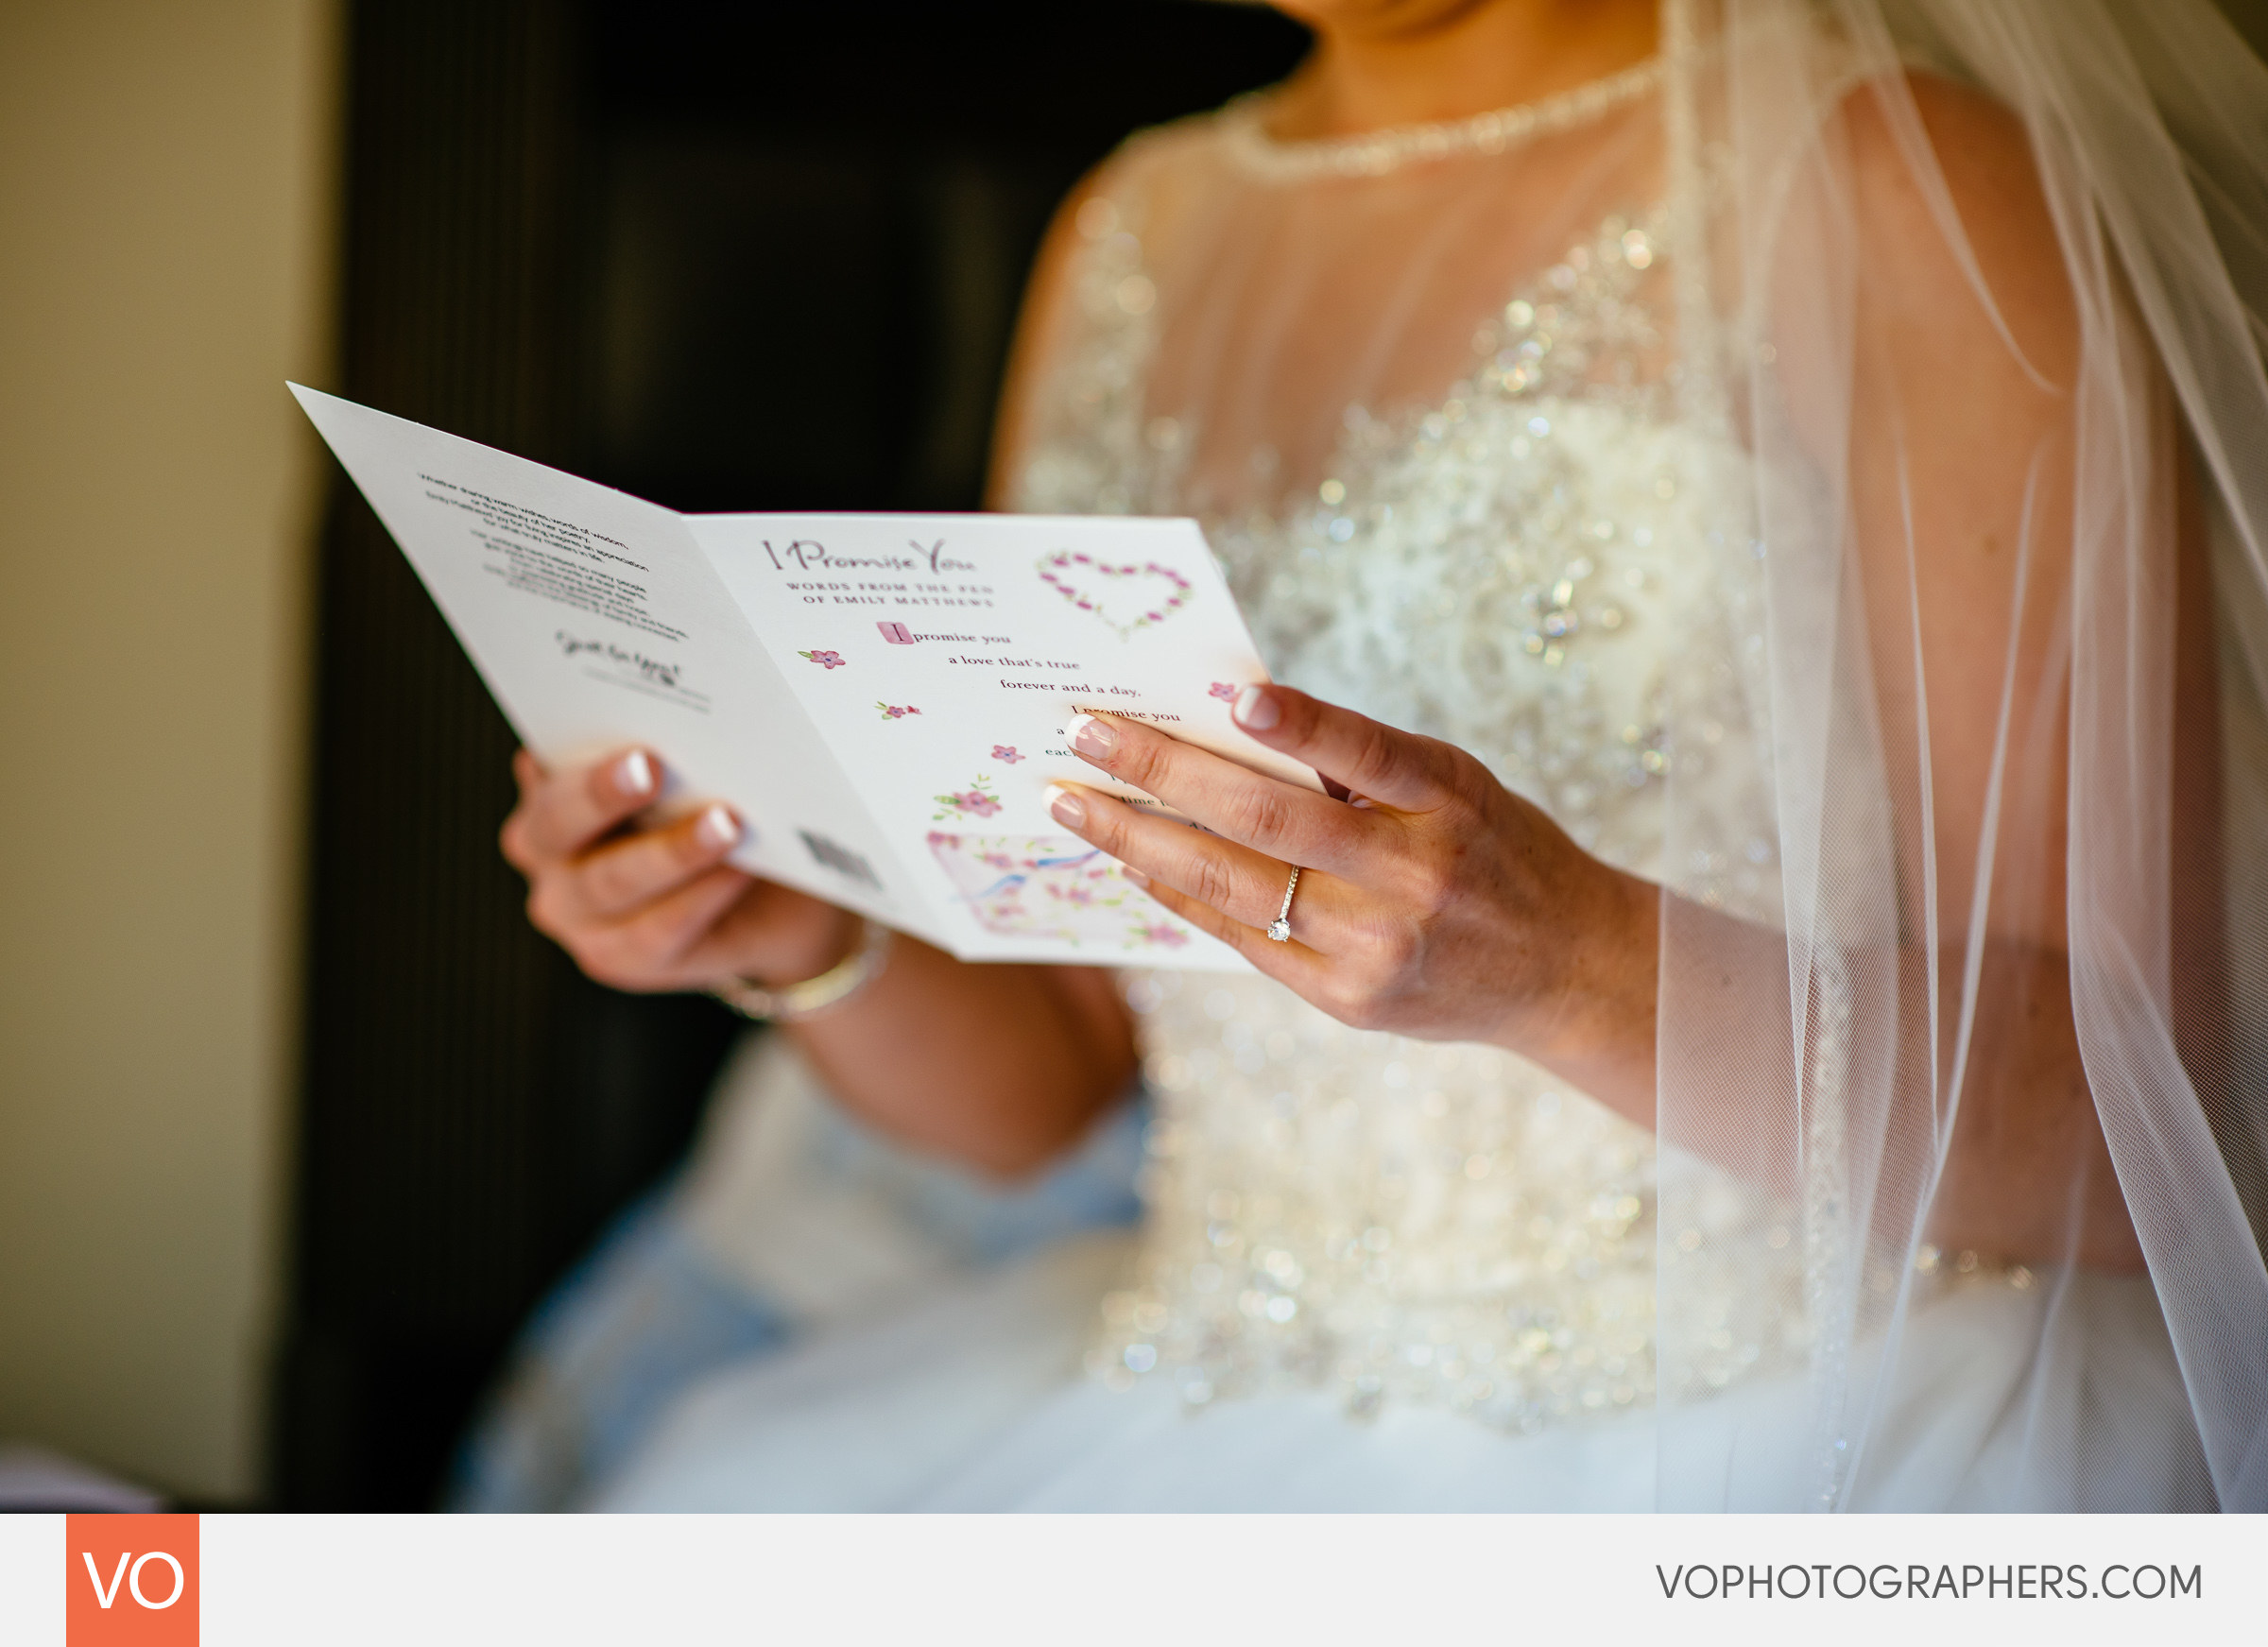 Bride reads a note from her future husband.